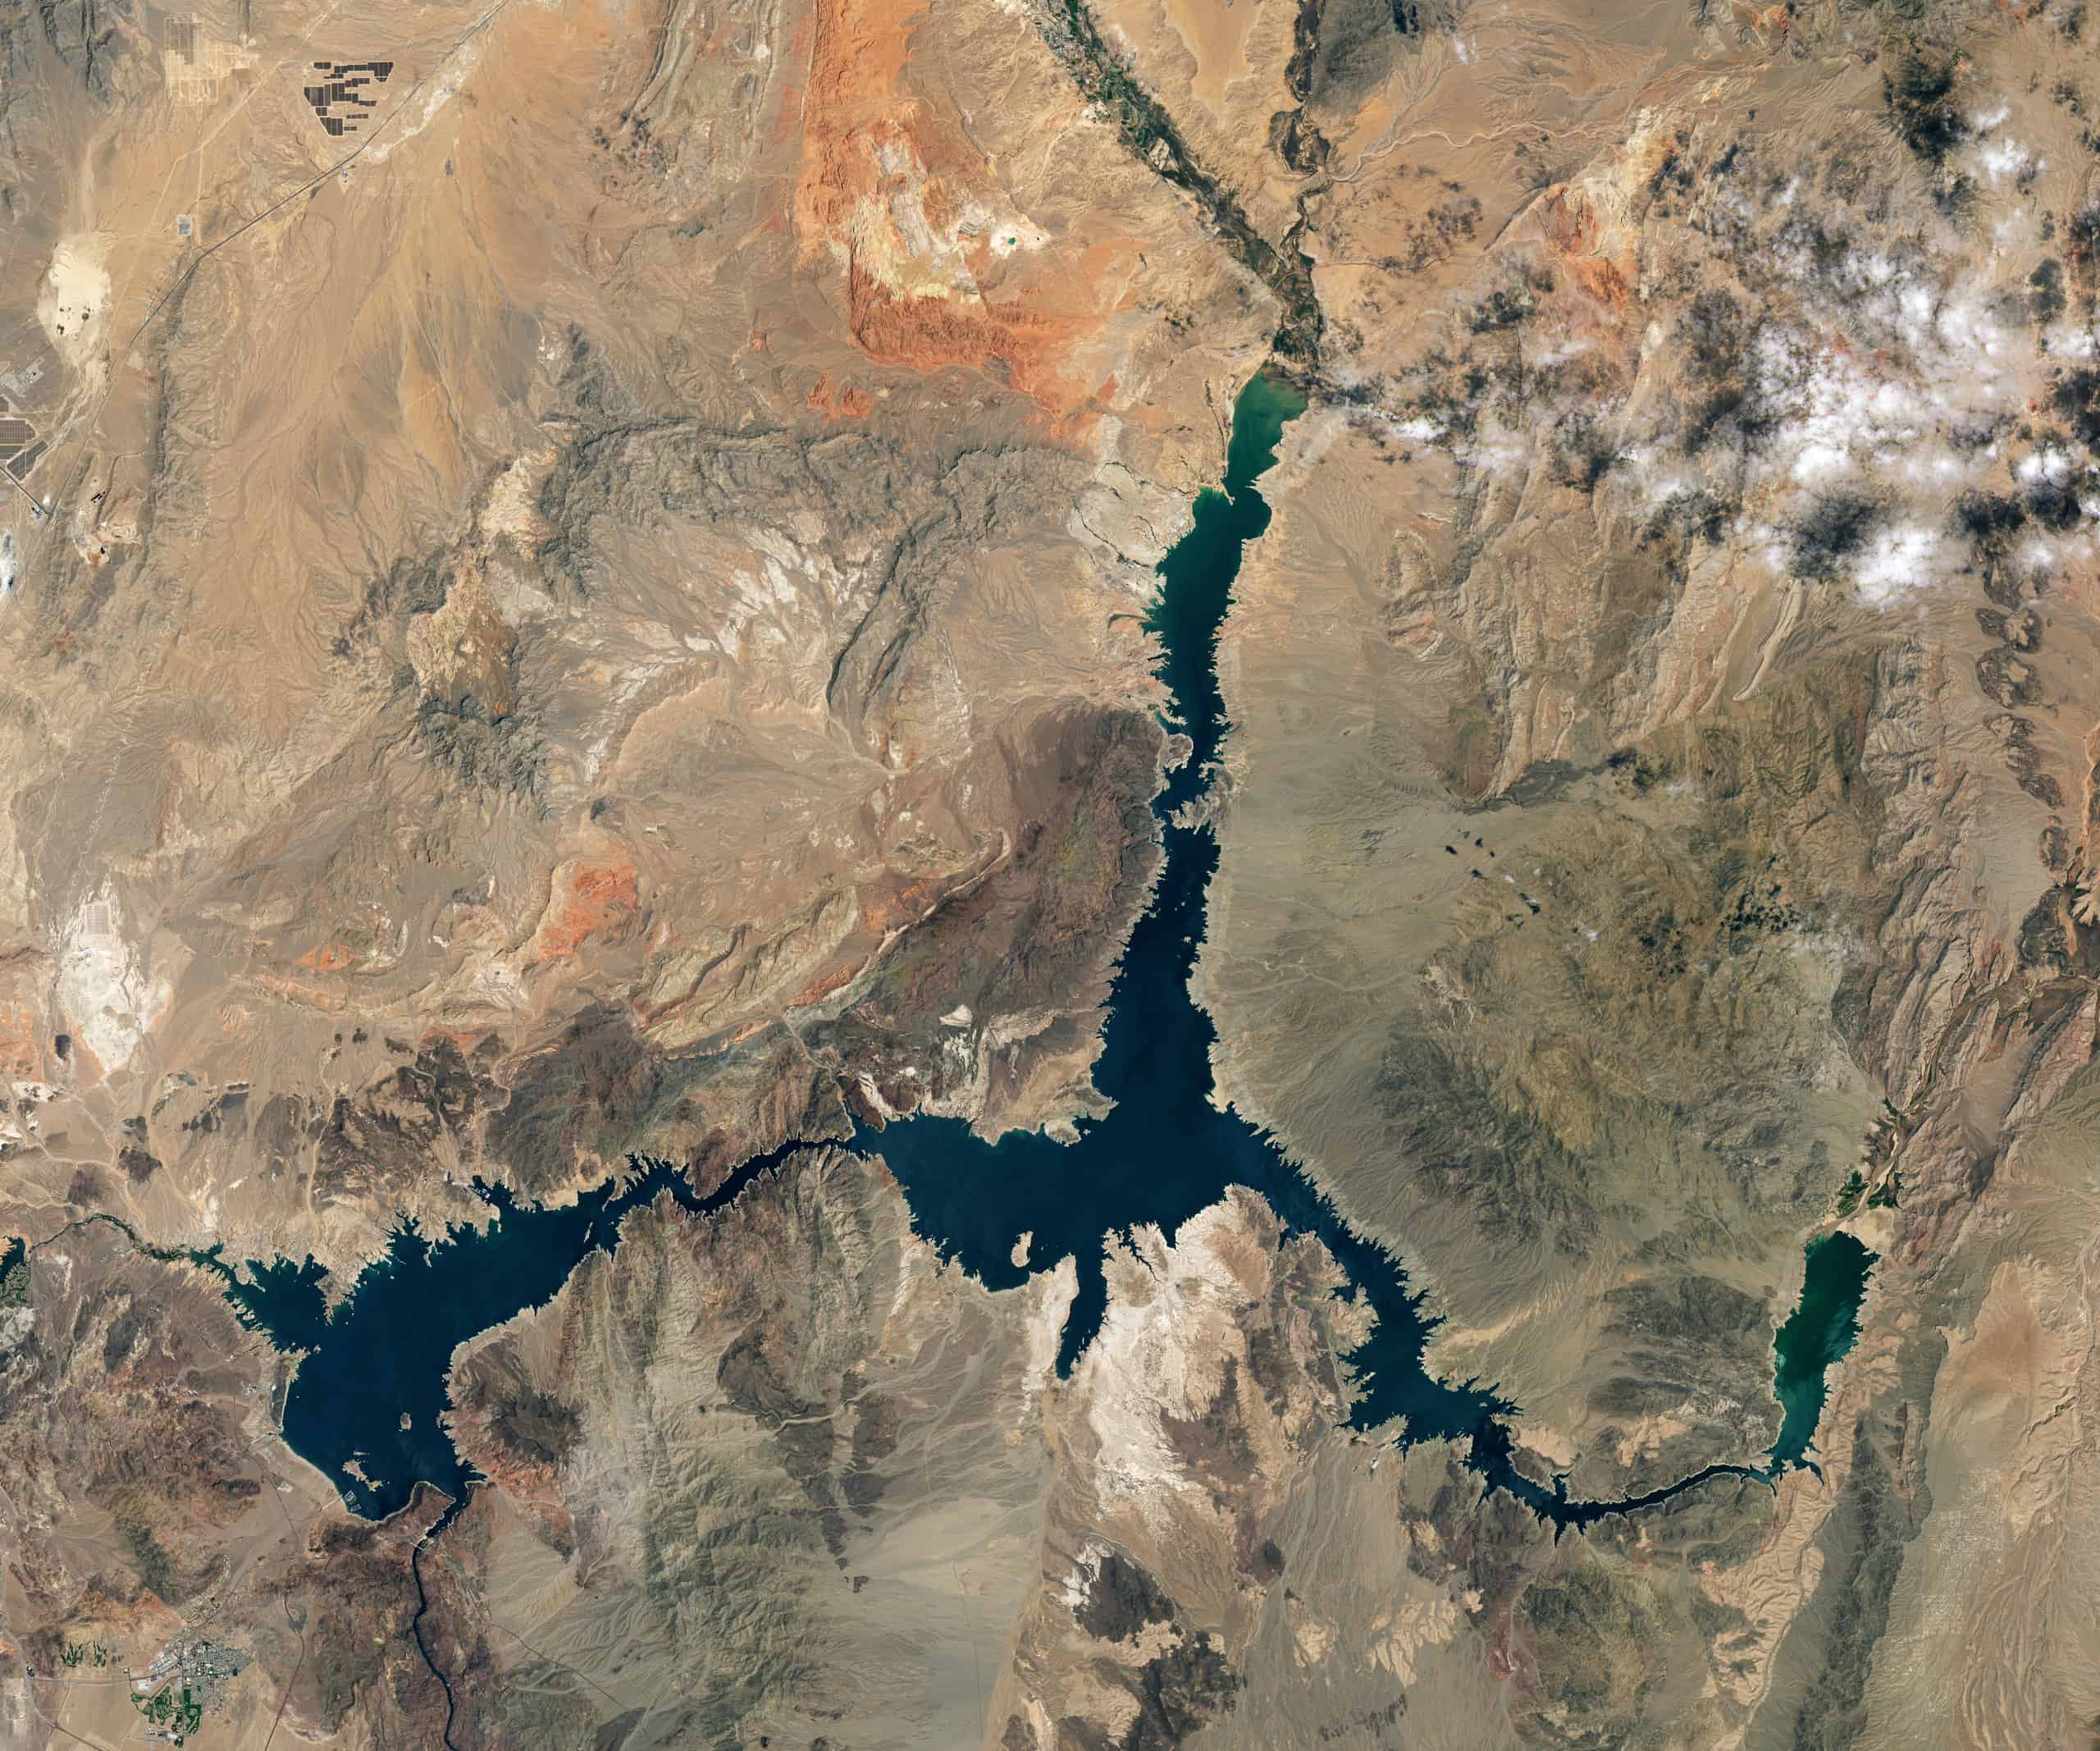 Why Is Lake Mead Drying Up? Here Are the Top 3 Reasons - AZ Animals